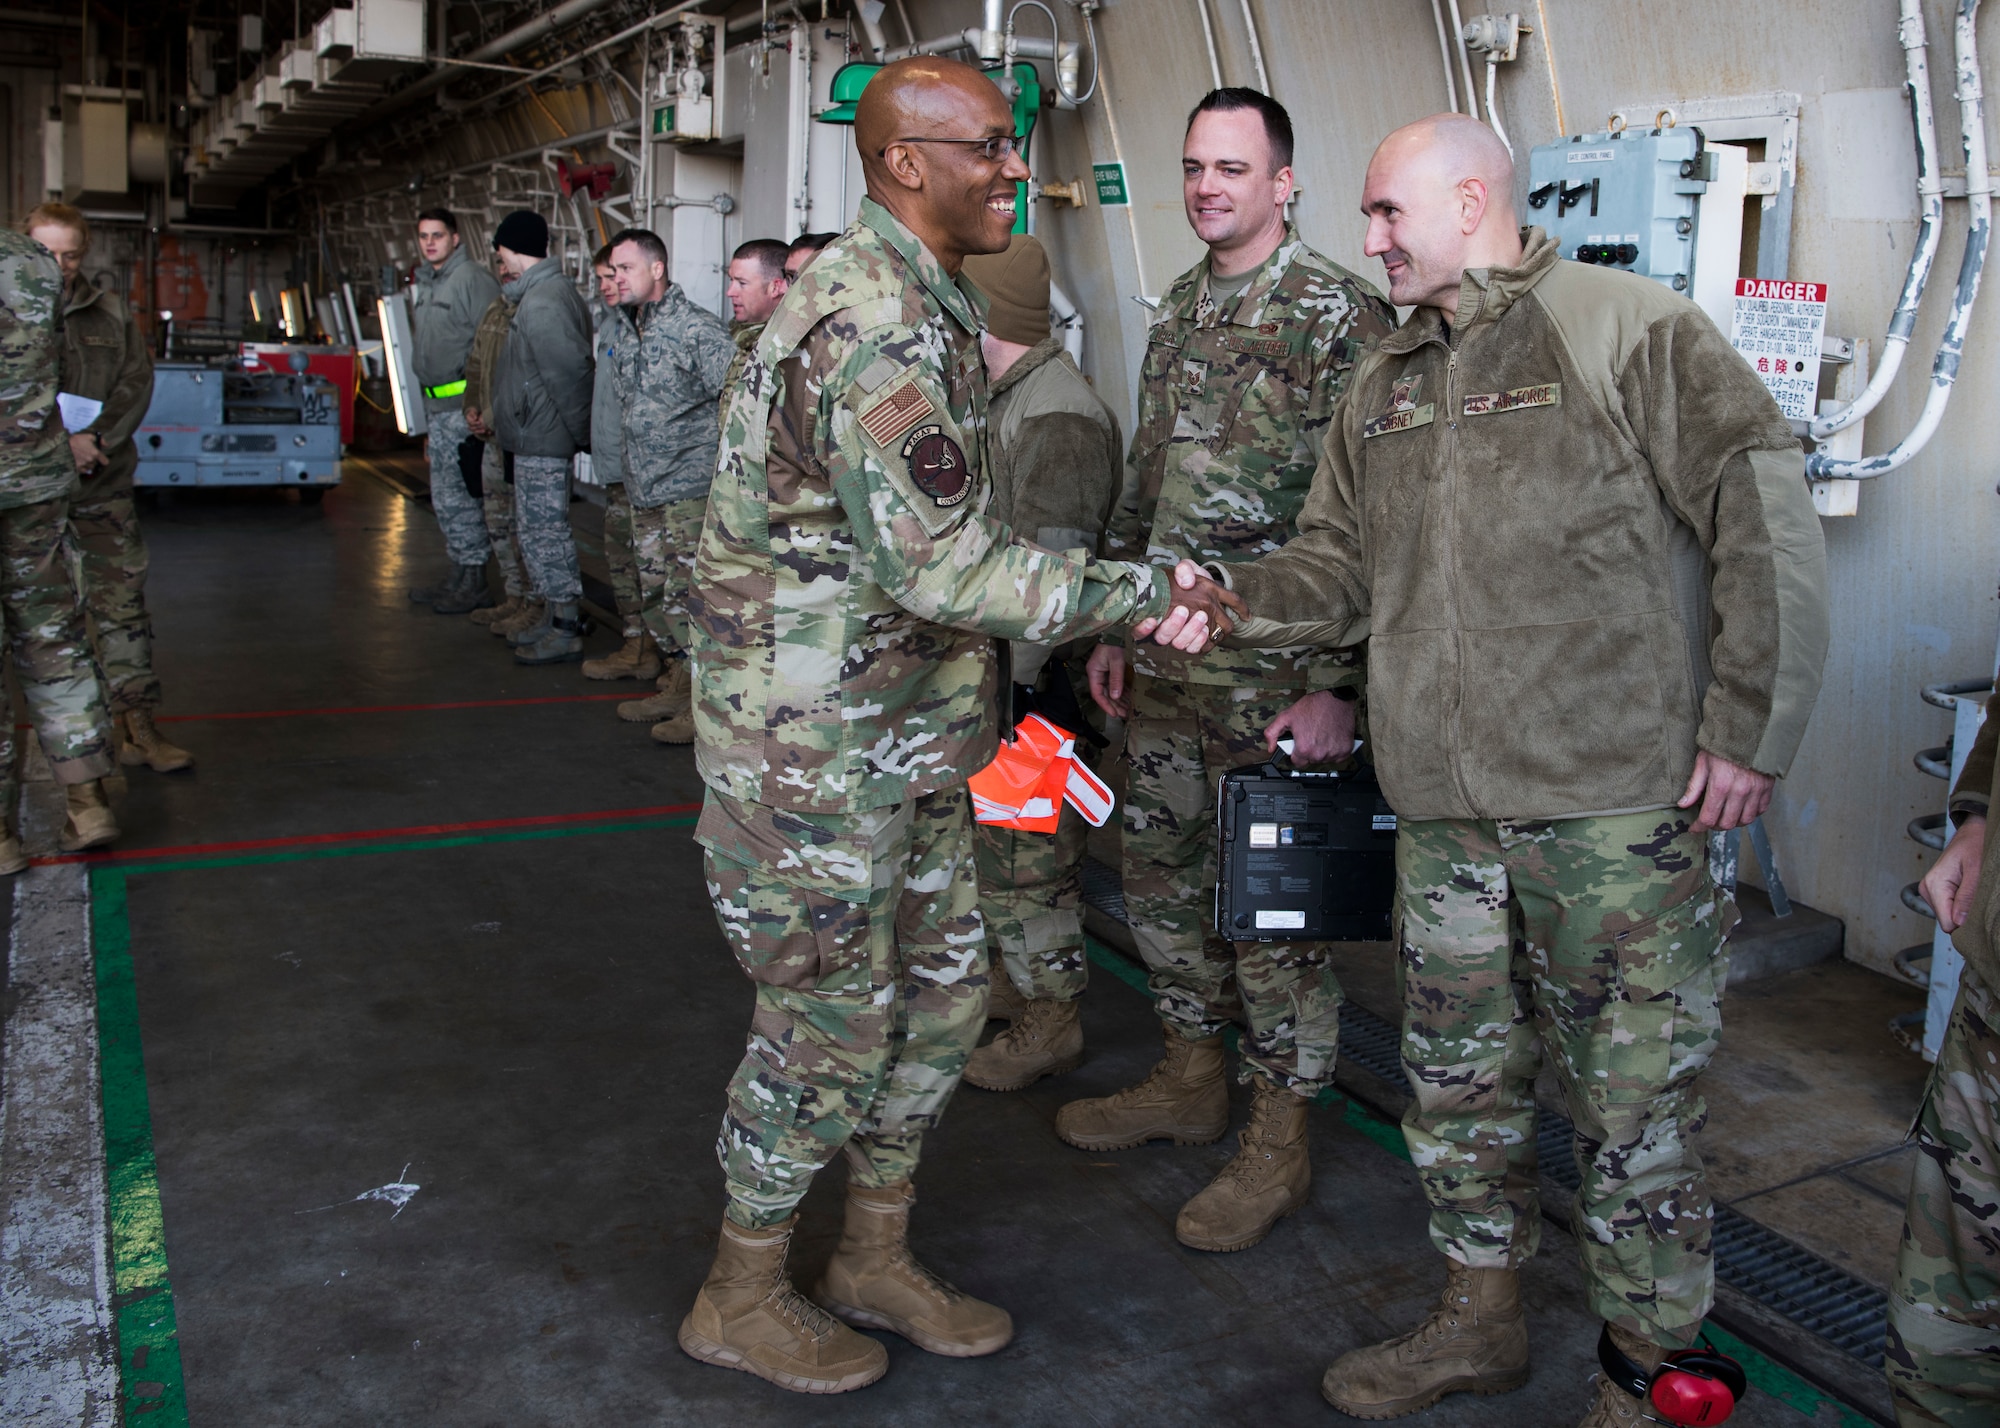 U.S. Air Force Gen. CQ Brown Jr., Pacific Air Forces commander, shakes hands with Master Sgt. Edward Abney, 35th Maintenance Group loading standardization crew chief, at Misawa Air Base, Japan, Nov. 14, 2019. Brown’s base tour included meeting with Team Misawa members from various units to better understand the capabilities and responsibilities each shop contributes to the “fight tonight” mentality in the Indo-Pacific. (U.S. Air Force Photo by Senior Airman Collette Brooks)